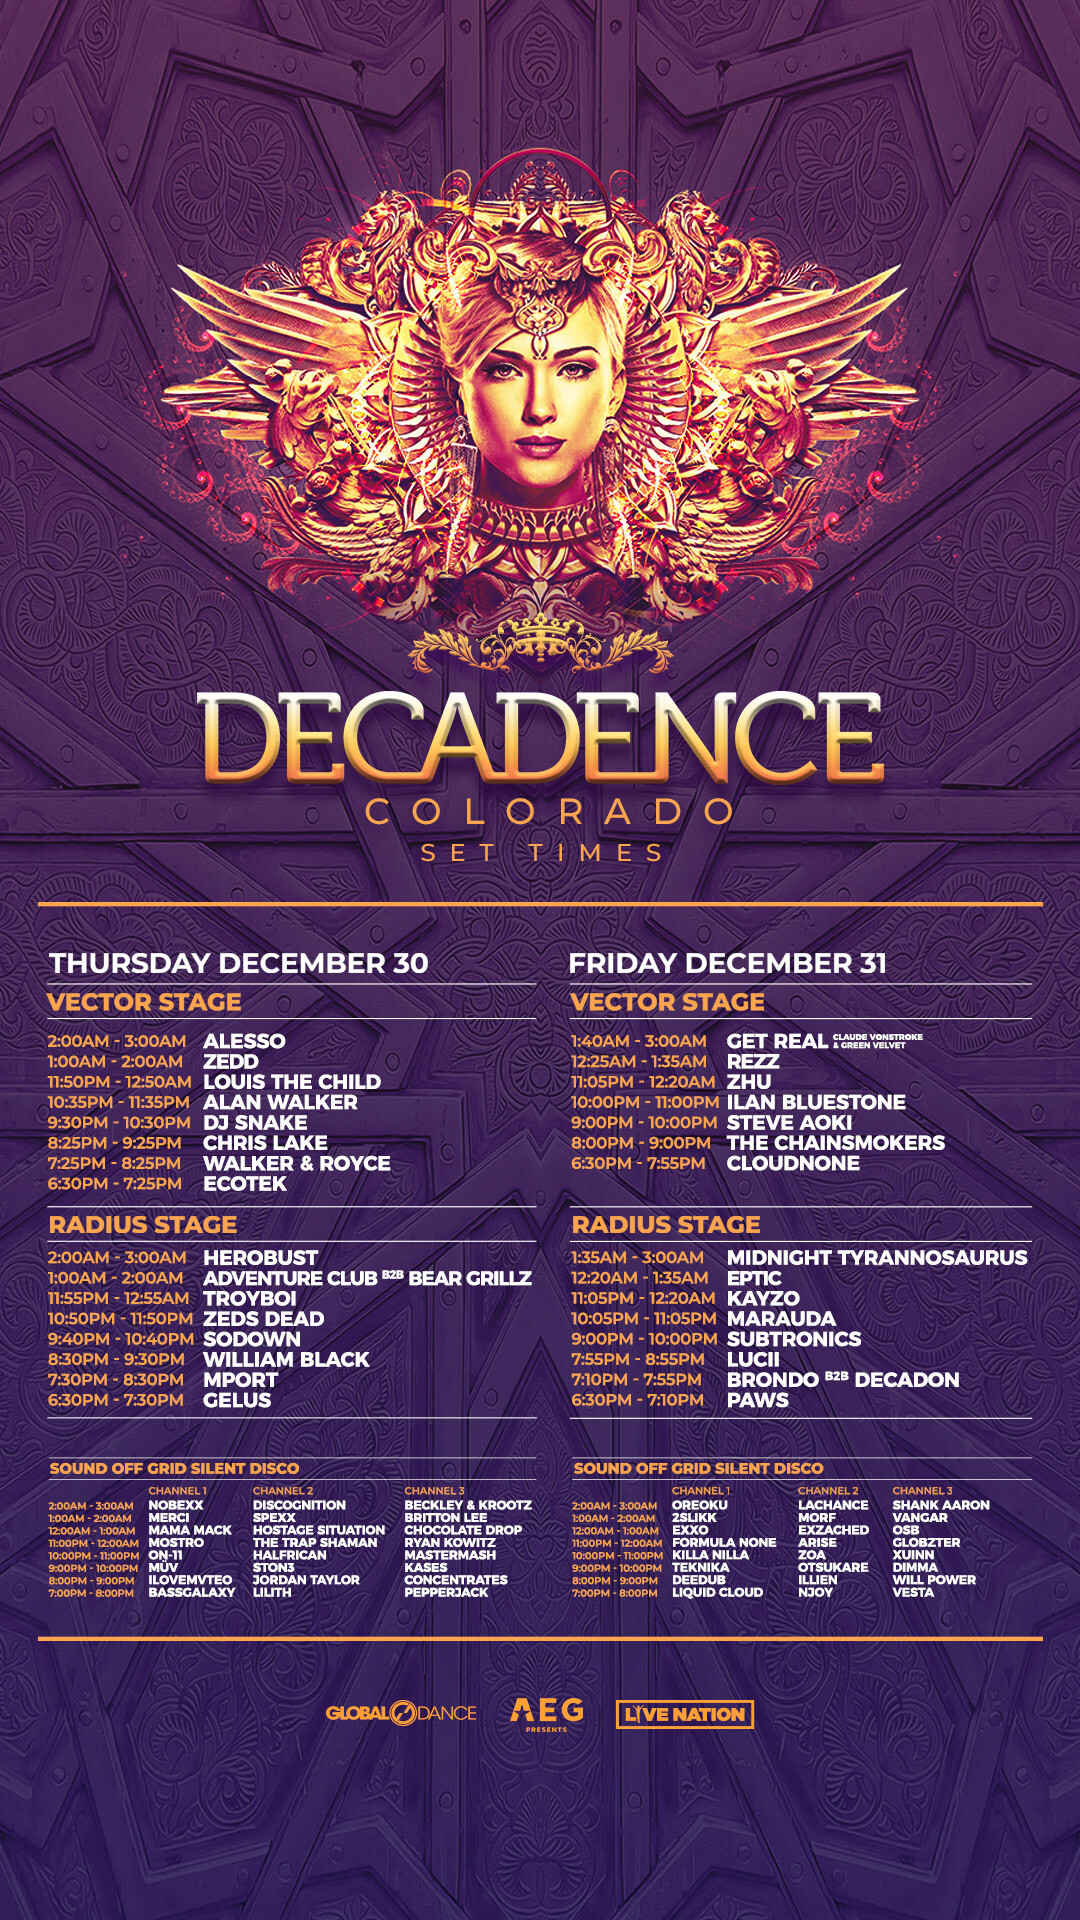 Decadence Colorado set times are up r/aves